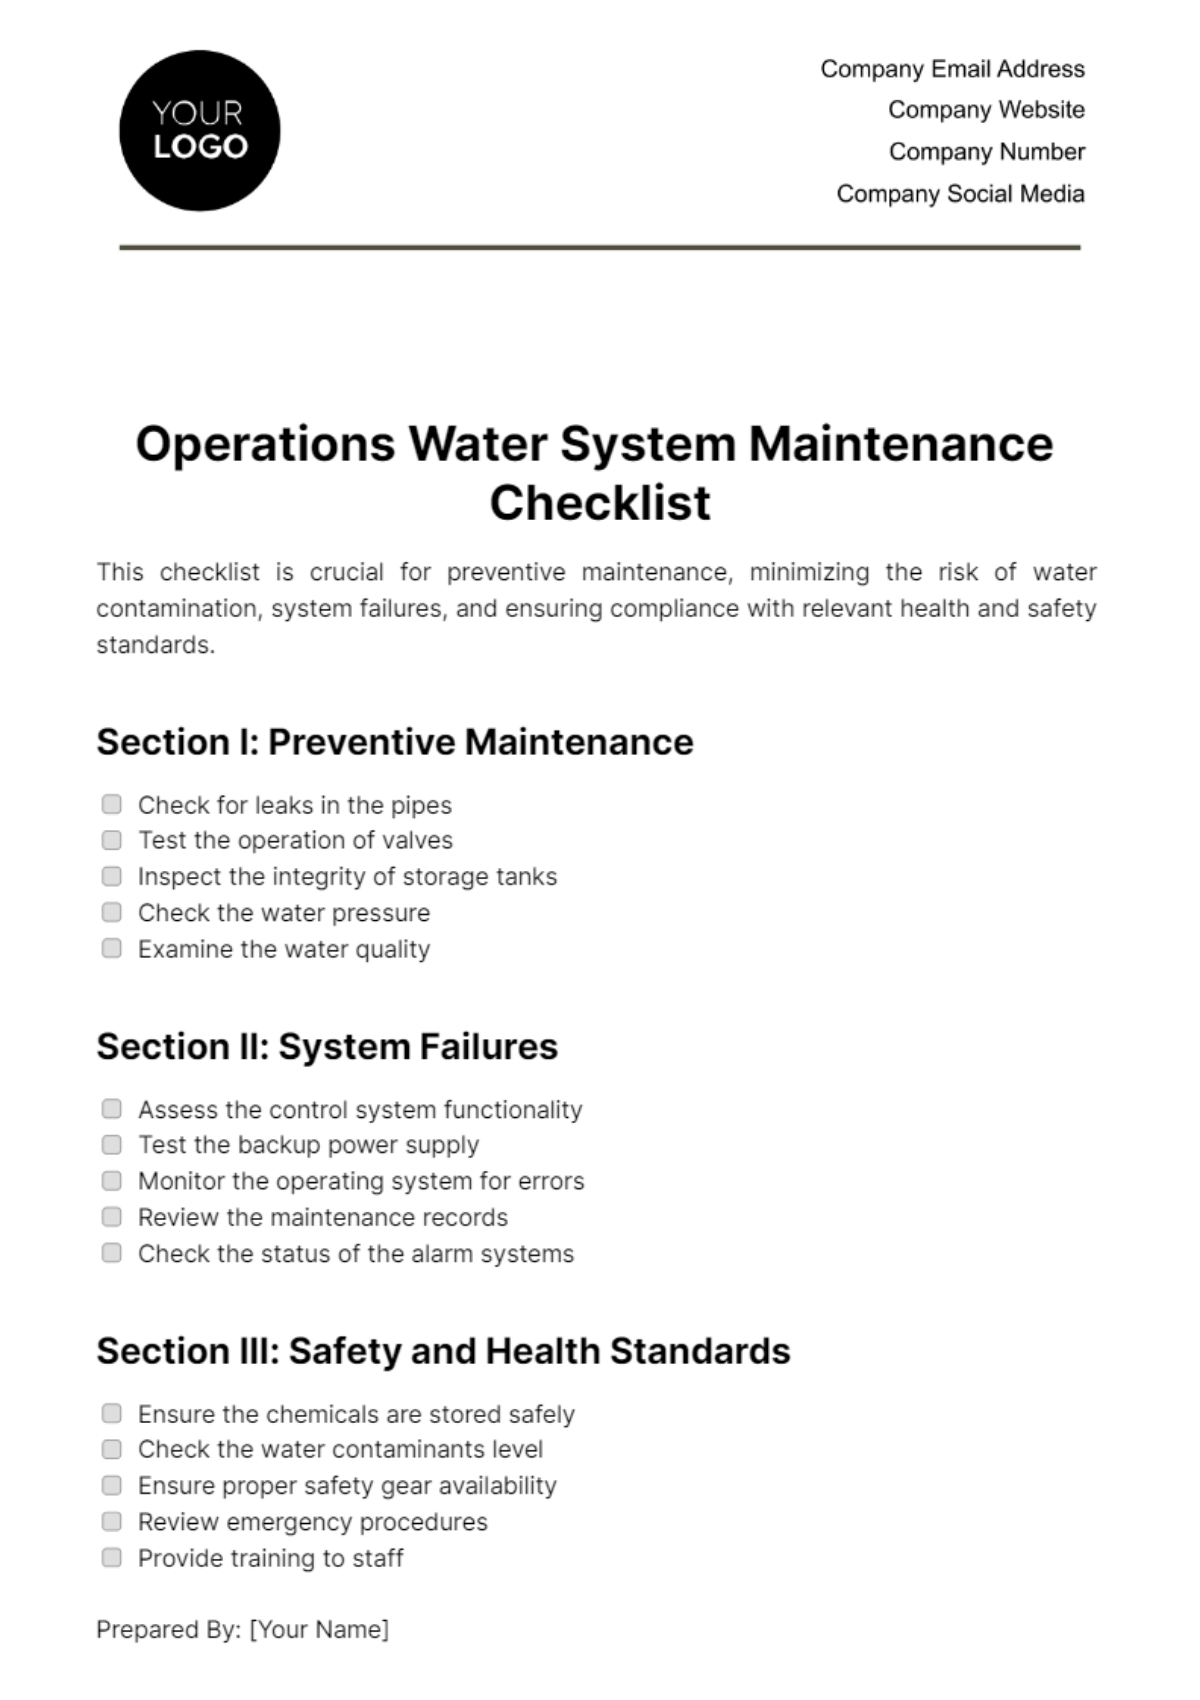 Operations Water System Maintenance Checklist Template